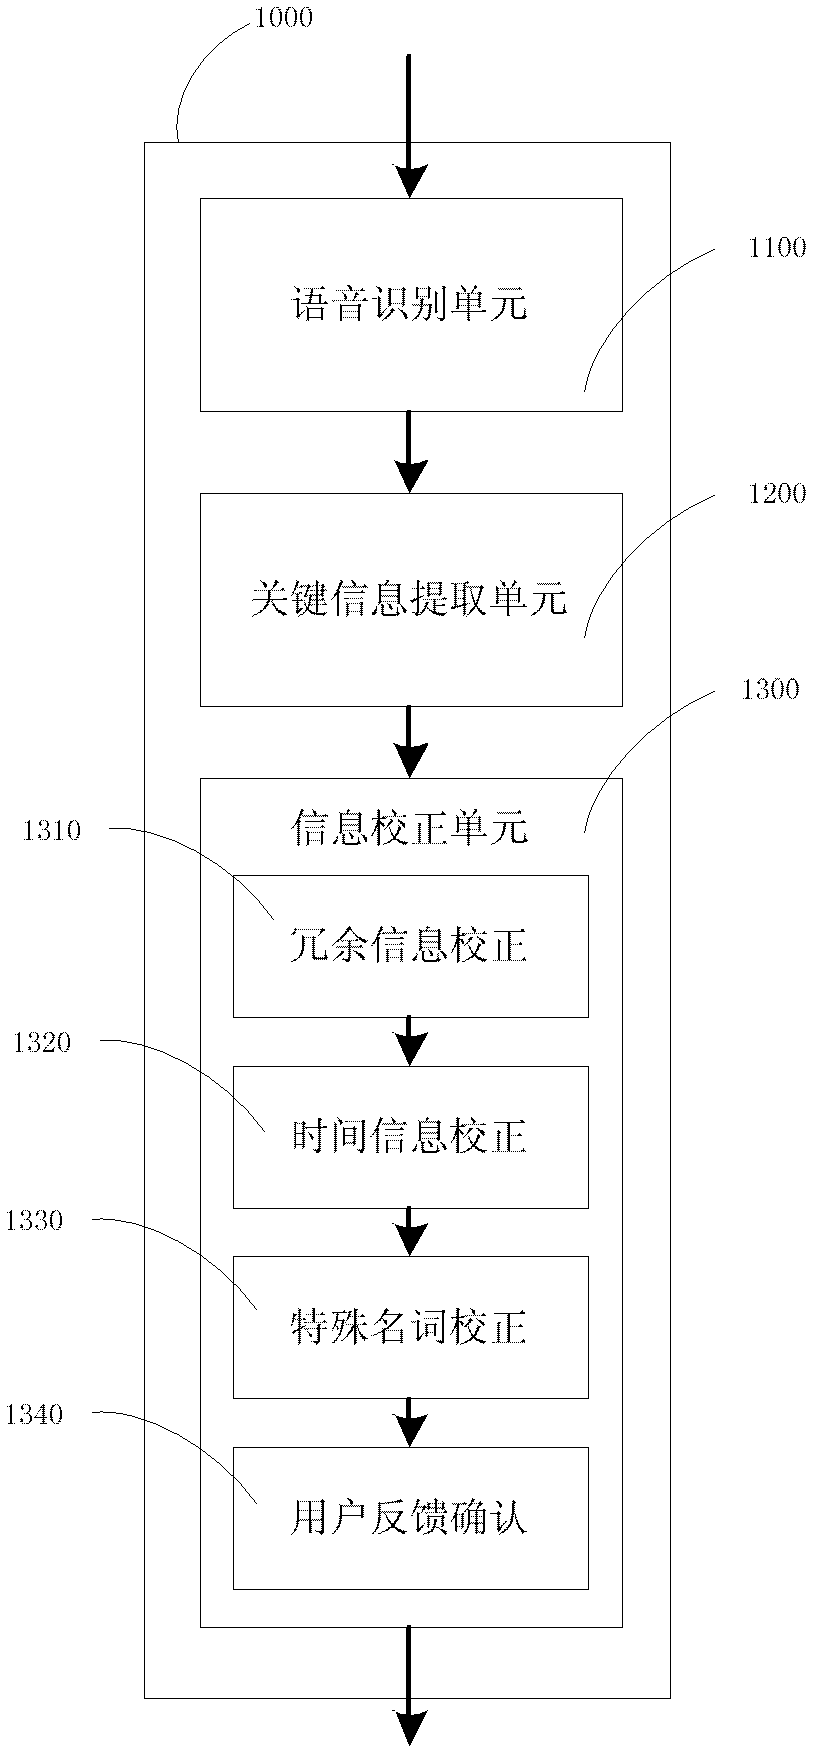 Voice key information recording device and method based on semi-automatic correction